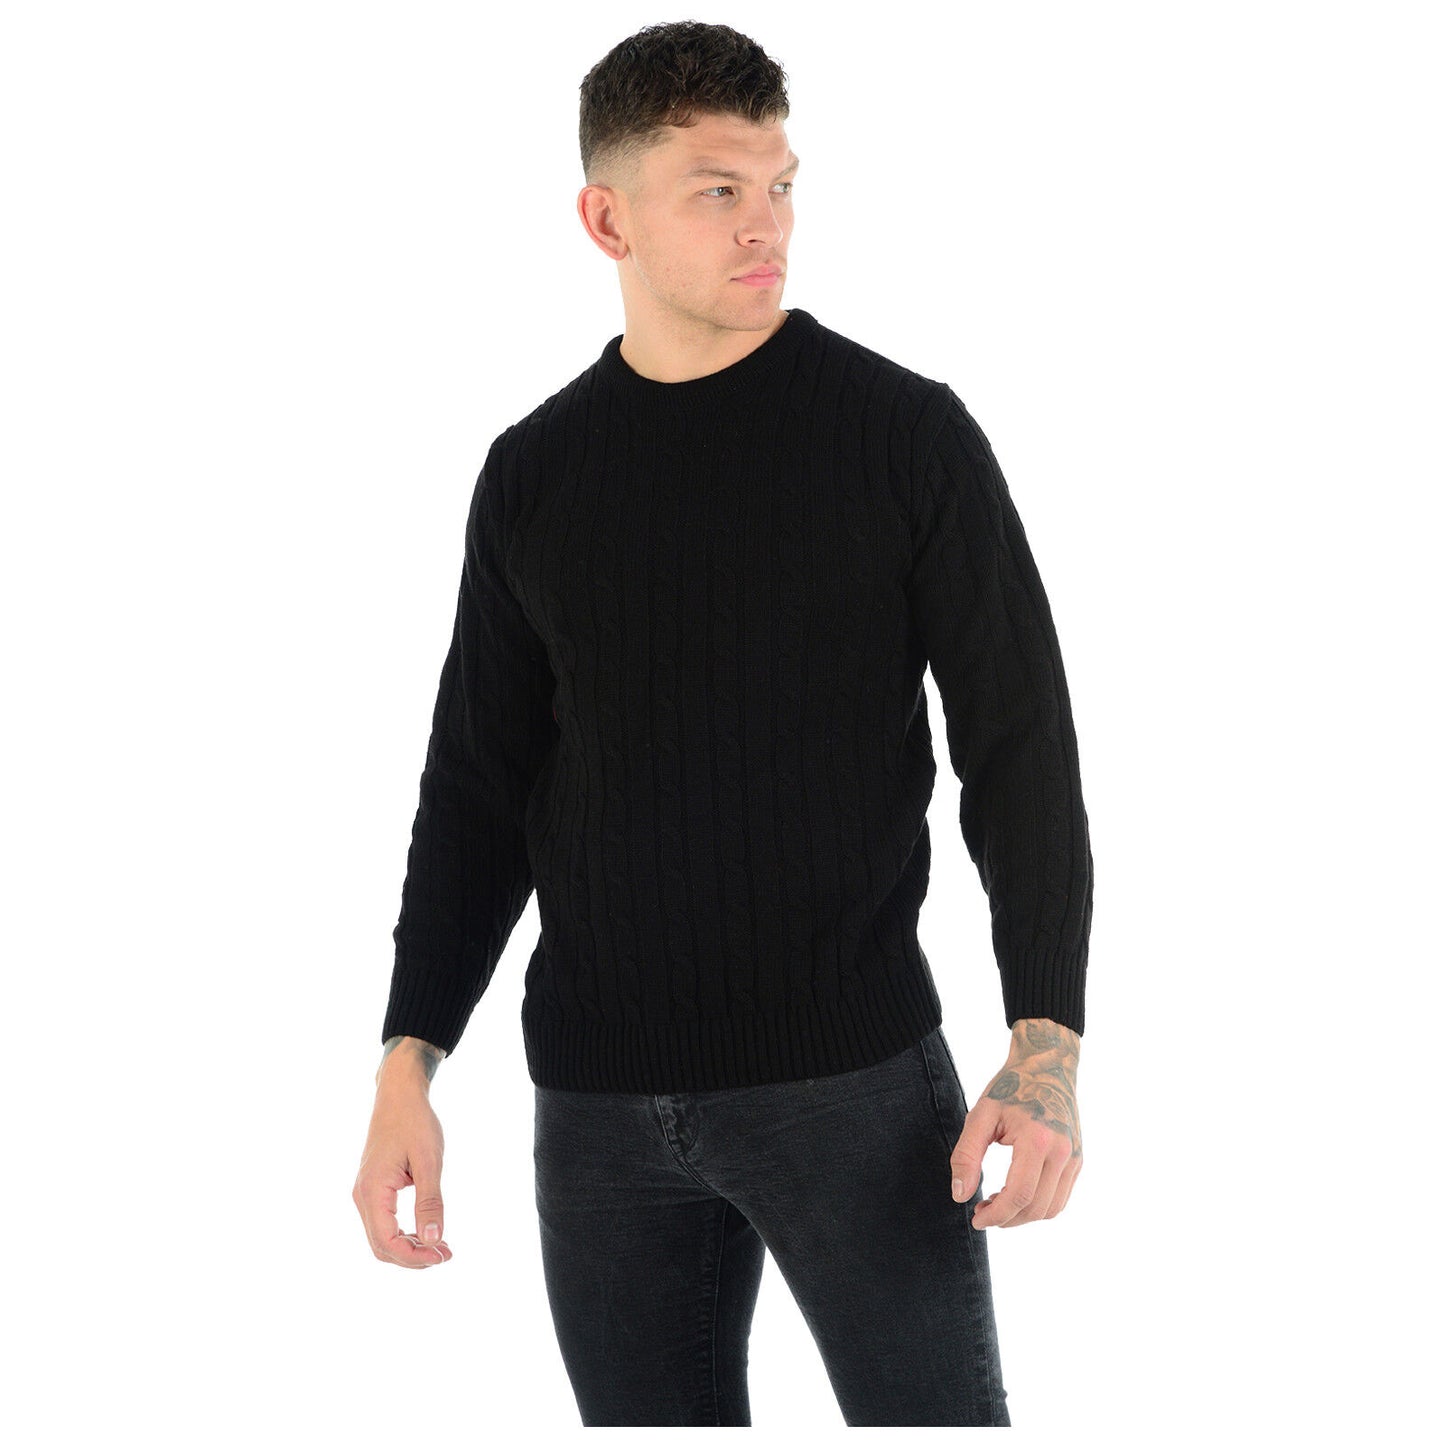 MENS CHUNKY CABLE KNIT JUMPER PLAIN PULLOVER THICK WARM WINTER KNITTED SWEATER